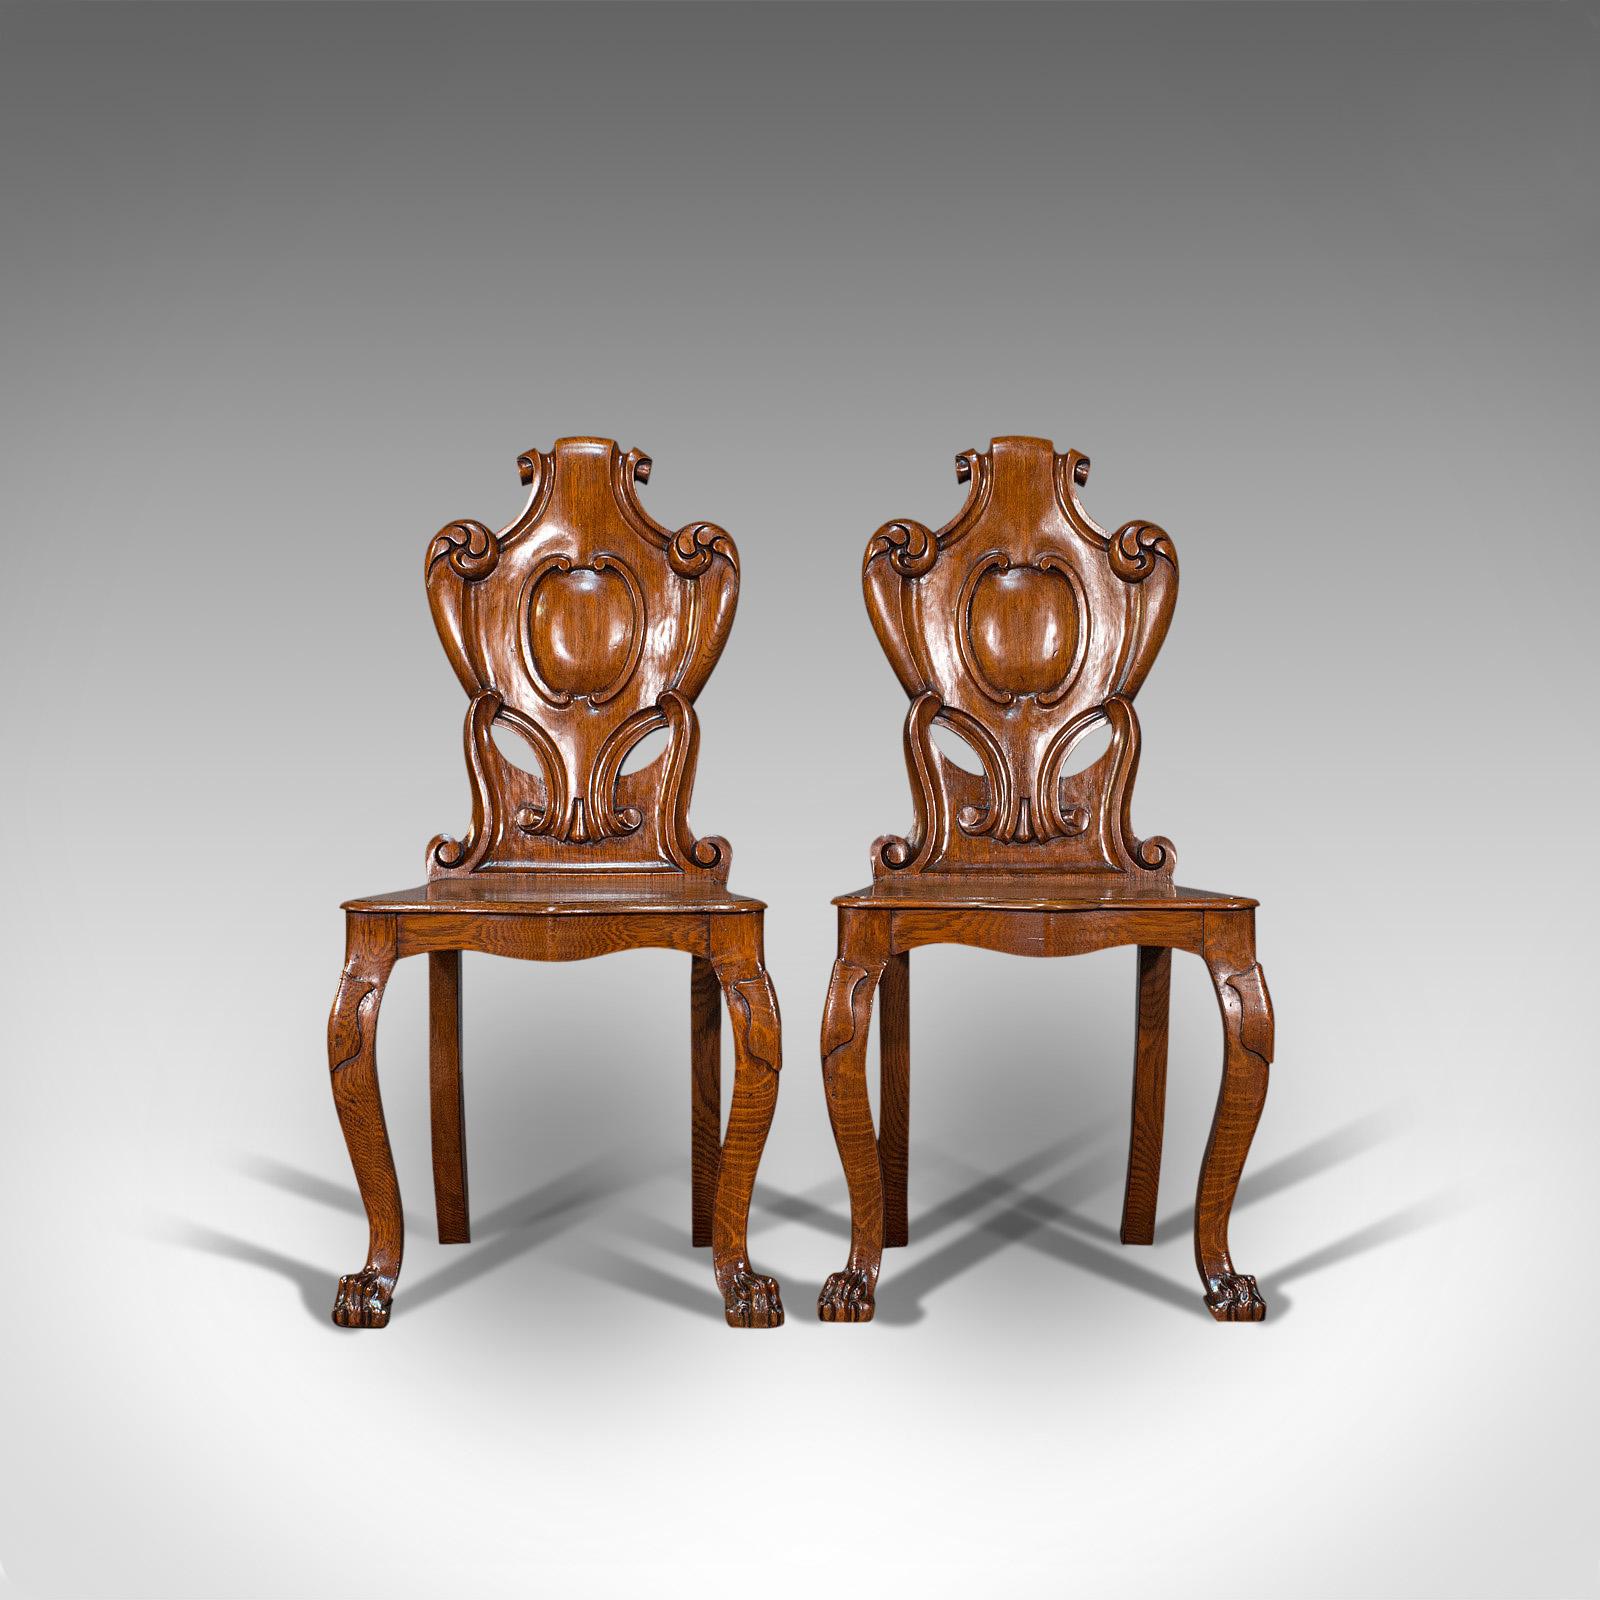 This is a pair of antique shield back chairs. A Scottish, oak hall seat of superb quality, dating to the Victorian period, circa 1880.

Magnificent chairs with appealing carved details
Displaying a desirable aged patina - lovingly cared for